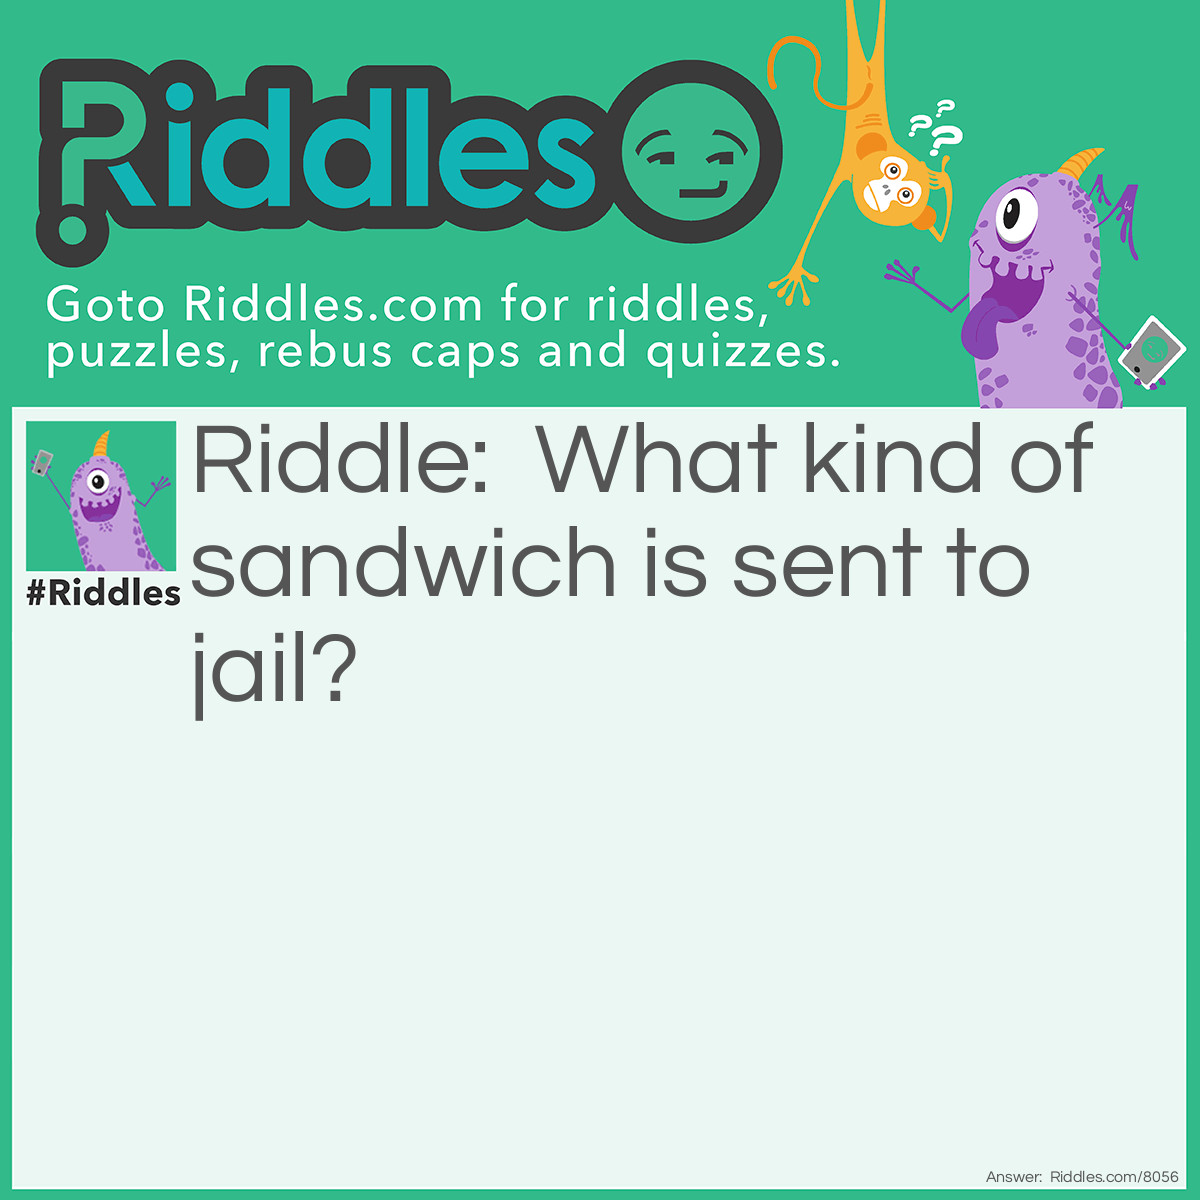 Riddle: What kind of sandwich is sent to jail? Answer: A bad one!